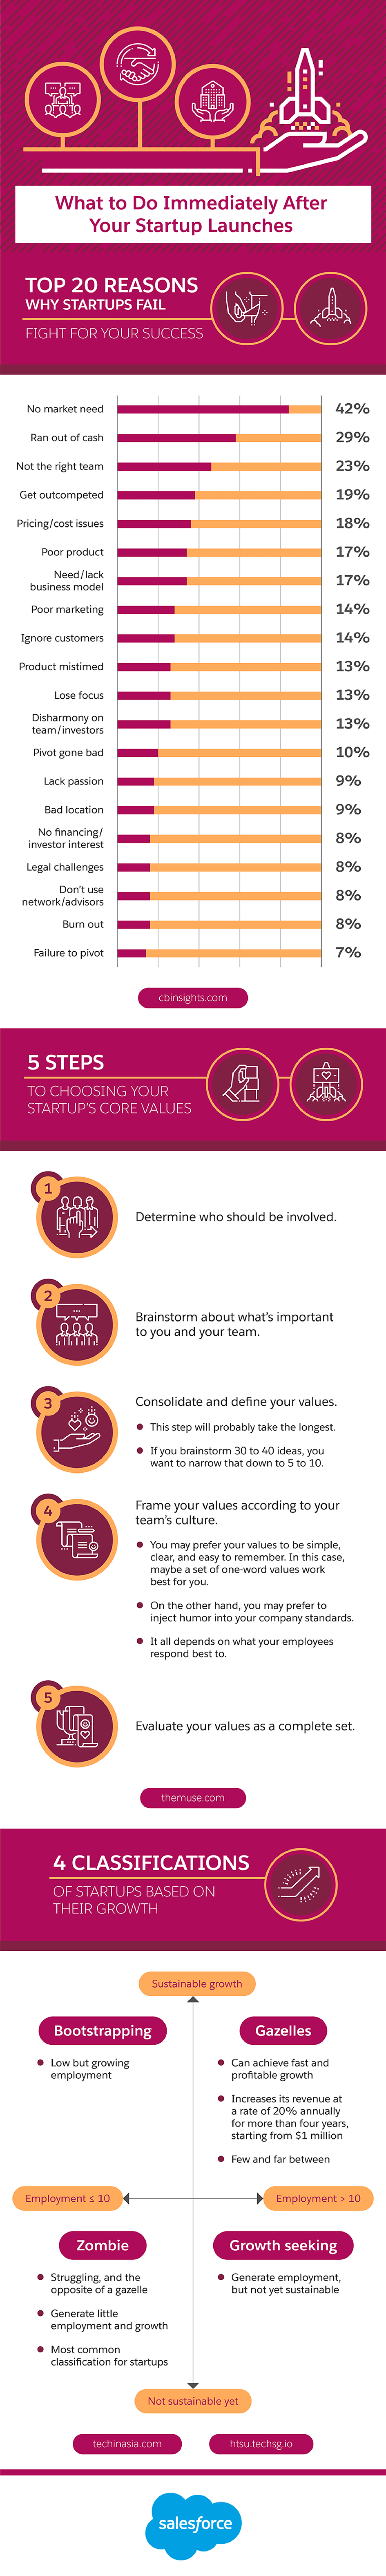 What to Do Immediately After Your Startup Launches - infographic